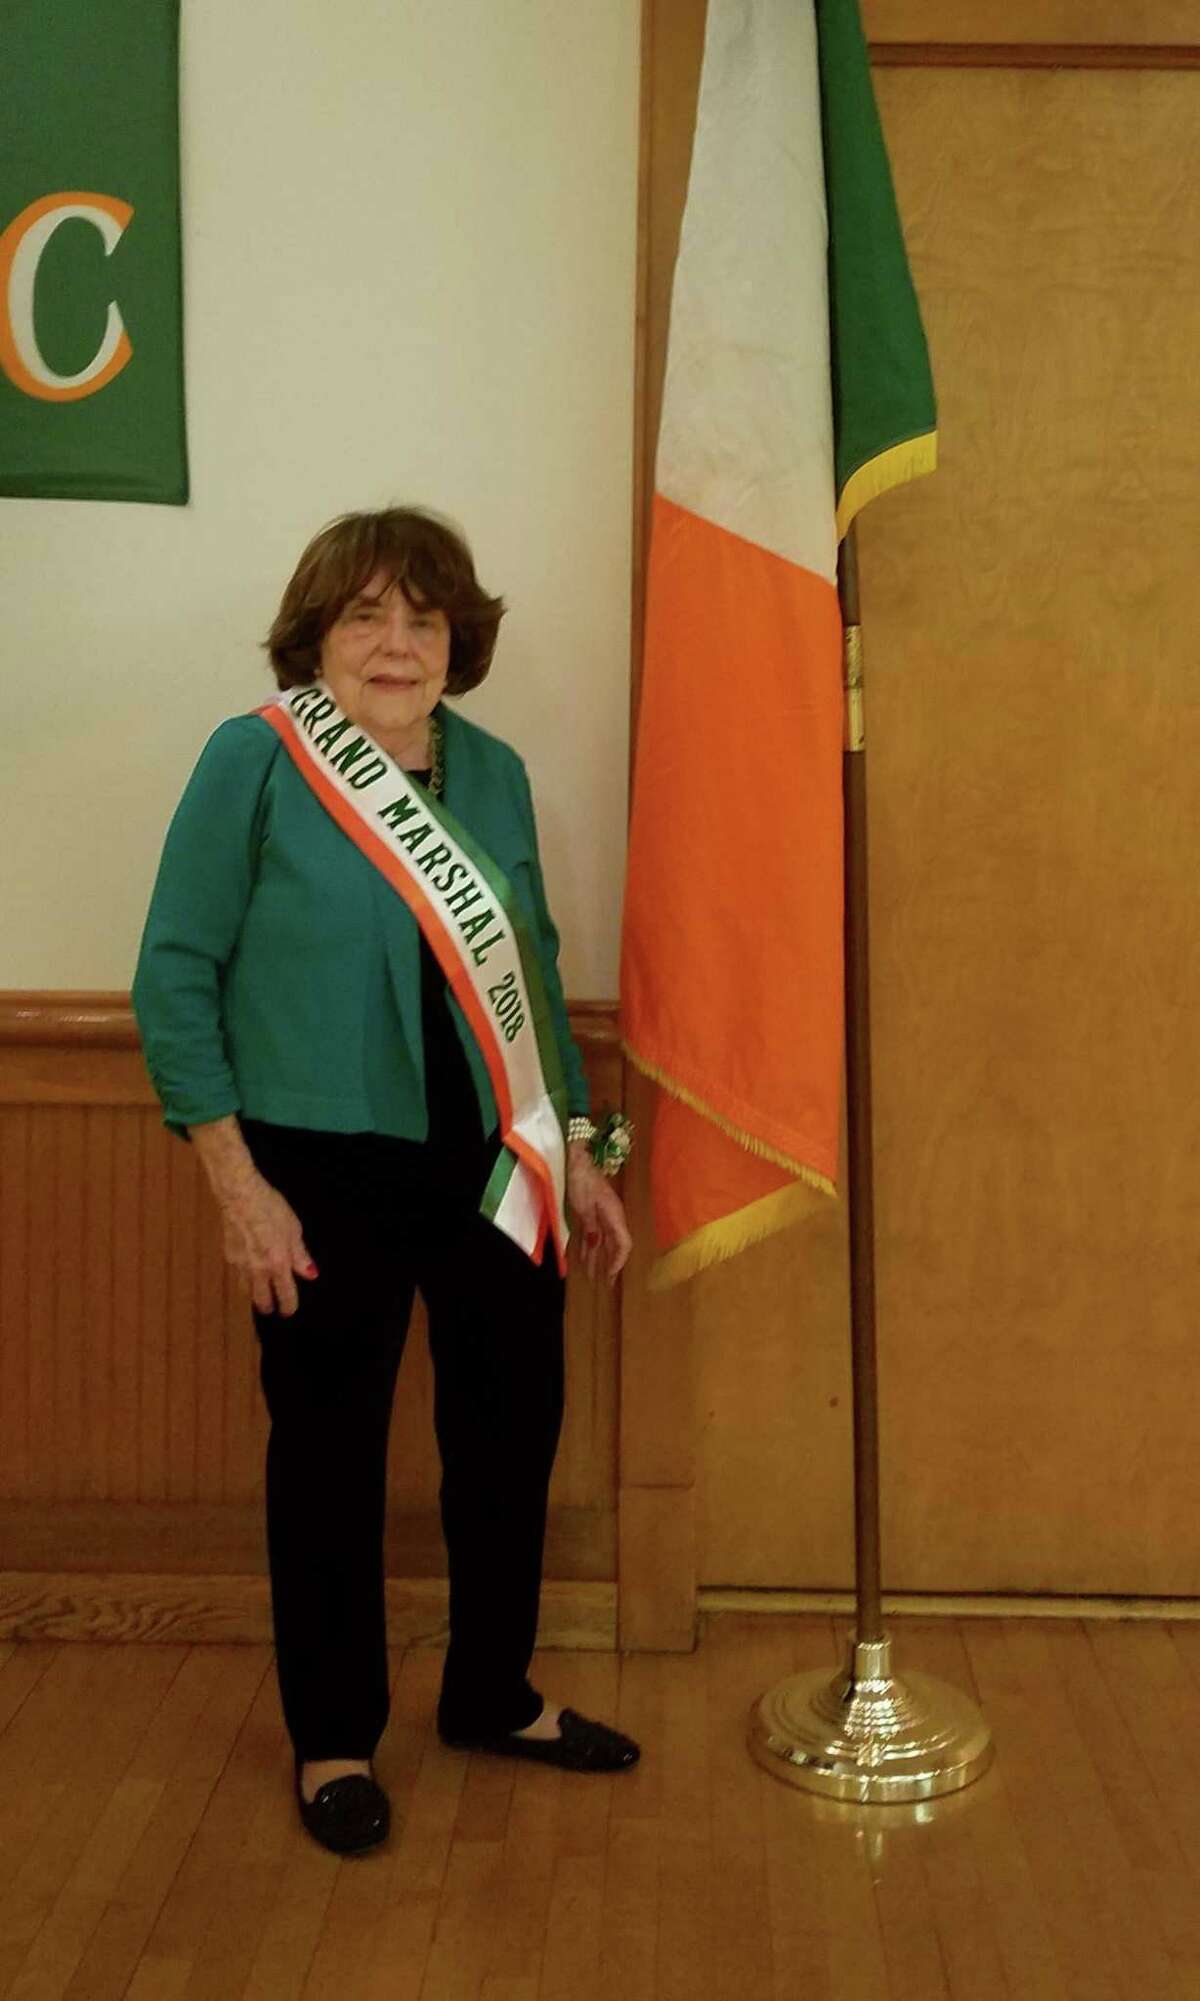 Pat Wilson, a lifelong town resident, will be the grand marshal of the 44th annual St. Patrick’s Day Parade in Greenwich. The parade, sponsored by the Greenwich Hibernian Association, will step off at 2 p.m. Sunday from Town Hall.